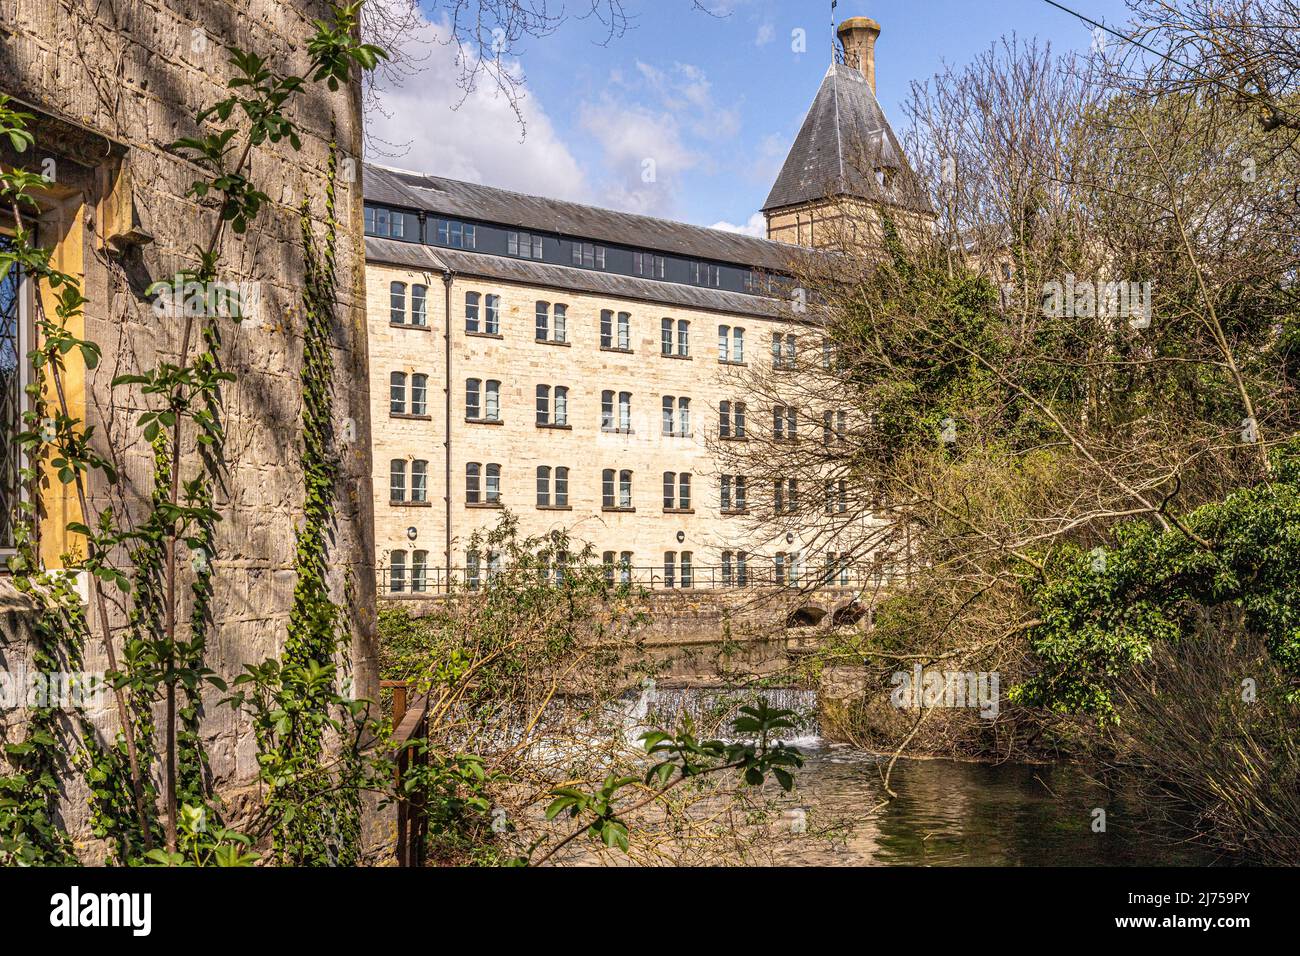 The River Frome flowing past Ebley Mill a 19th century cloth mill now converted into offices for Stroud District Council, Ebley, Gloucestershire, UK Stock Photo